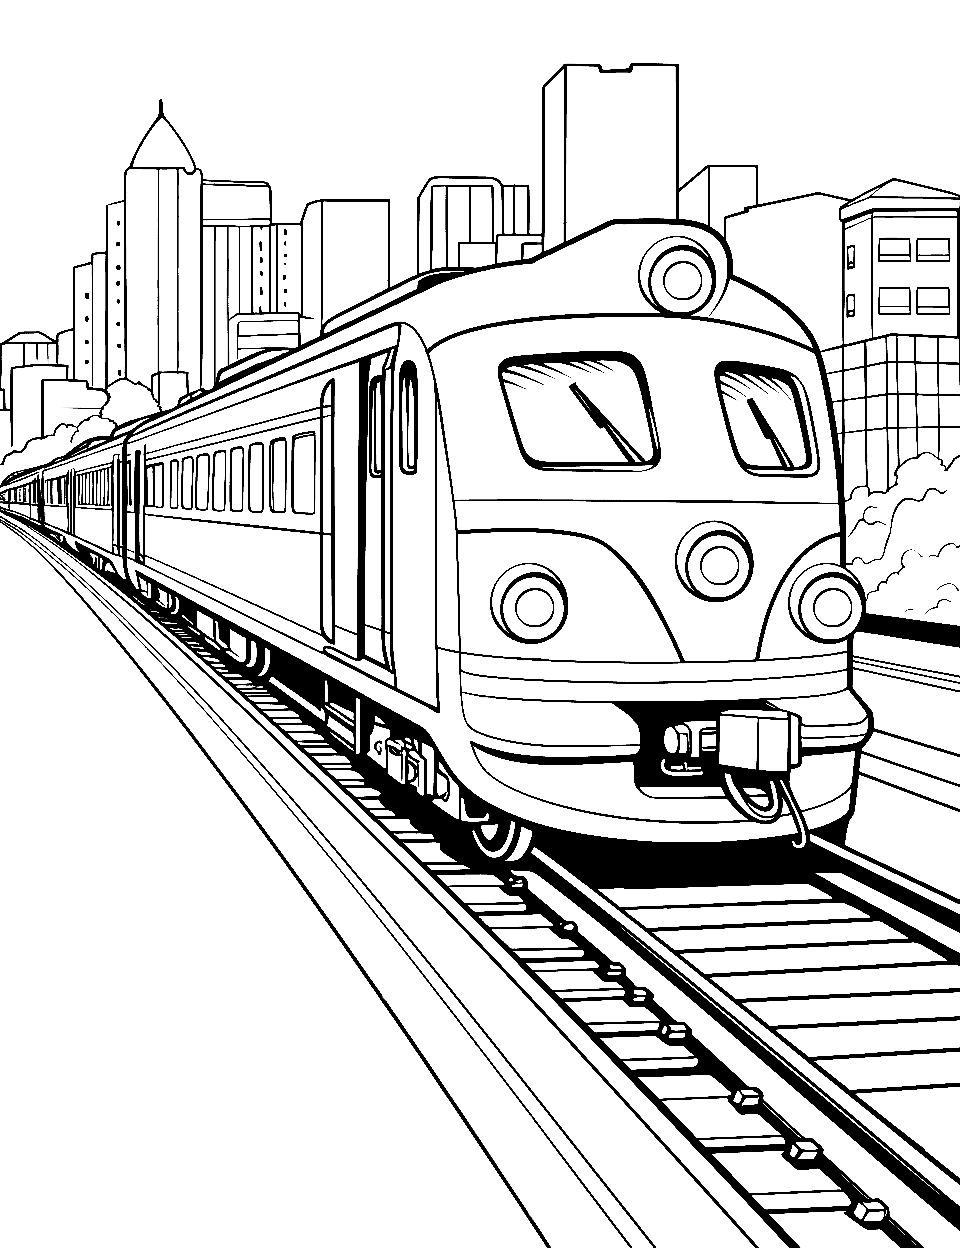 Rapid Transport in the City Coloring Page - A high-speed train dashing through a modern city.